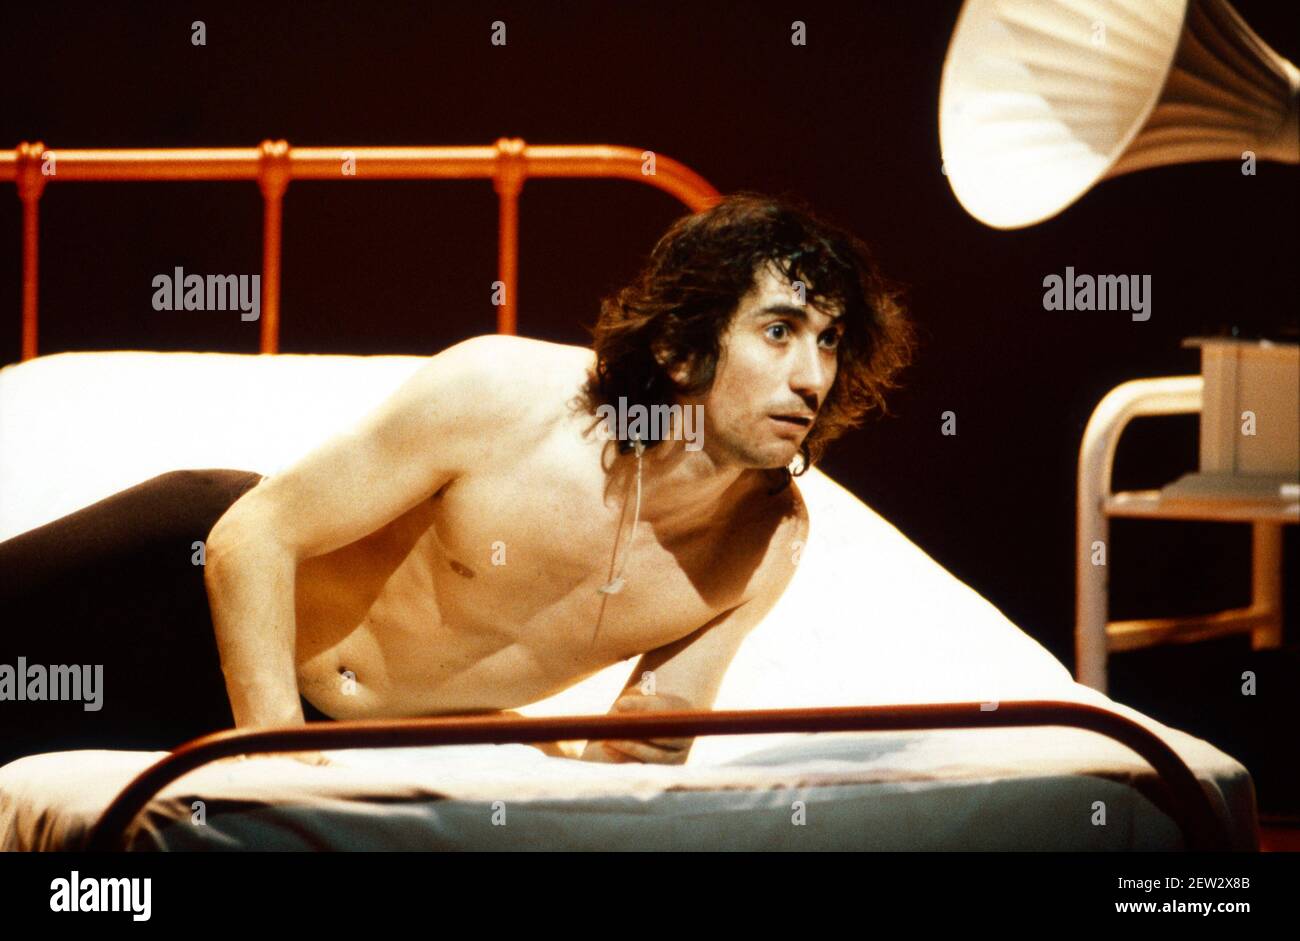 Phil Daniels (Alex) in A CLOCKWORK ORANGE 2004 at the Barbican Theatre, London EC2  06/02/1990  a Royal Shakespeare Company production  written by Anthony Burgess in collaboration with Ron Daniels  music by The Edge & Bono  design: Richard Hudson  lighting: David Hersey  choreography: Arlene Phillips  fights: Malcolm Ranson  director: Ron Daniels Stock Photo